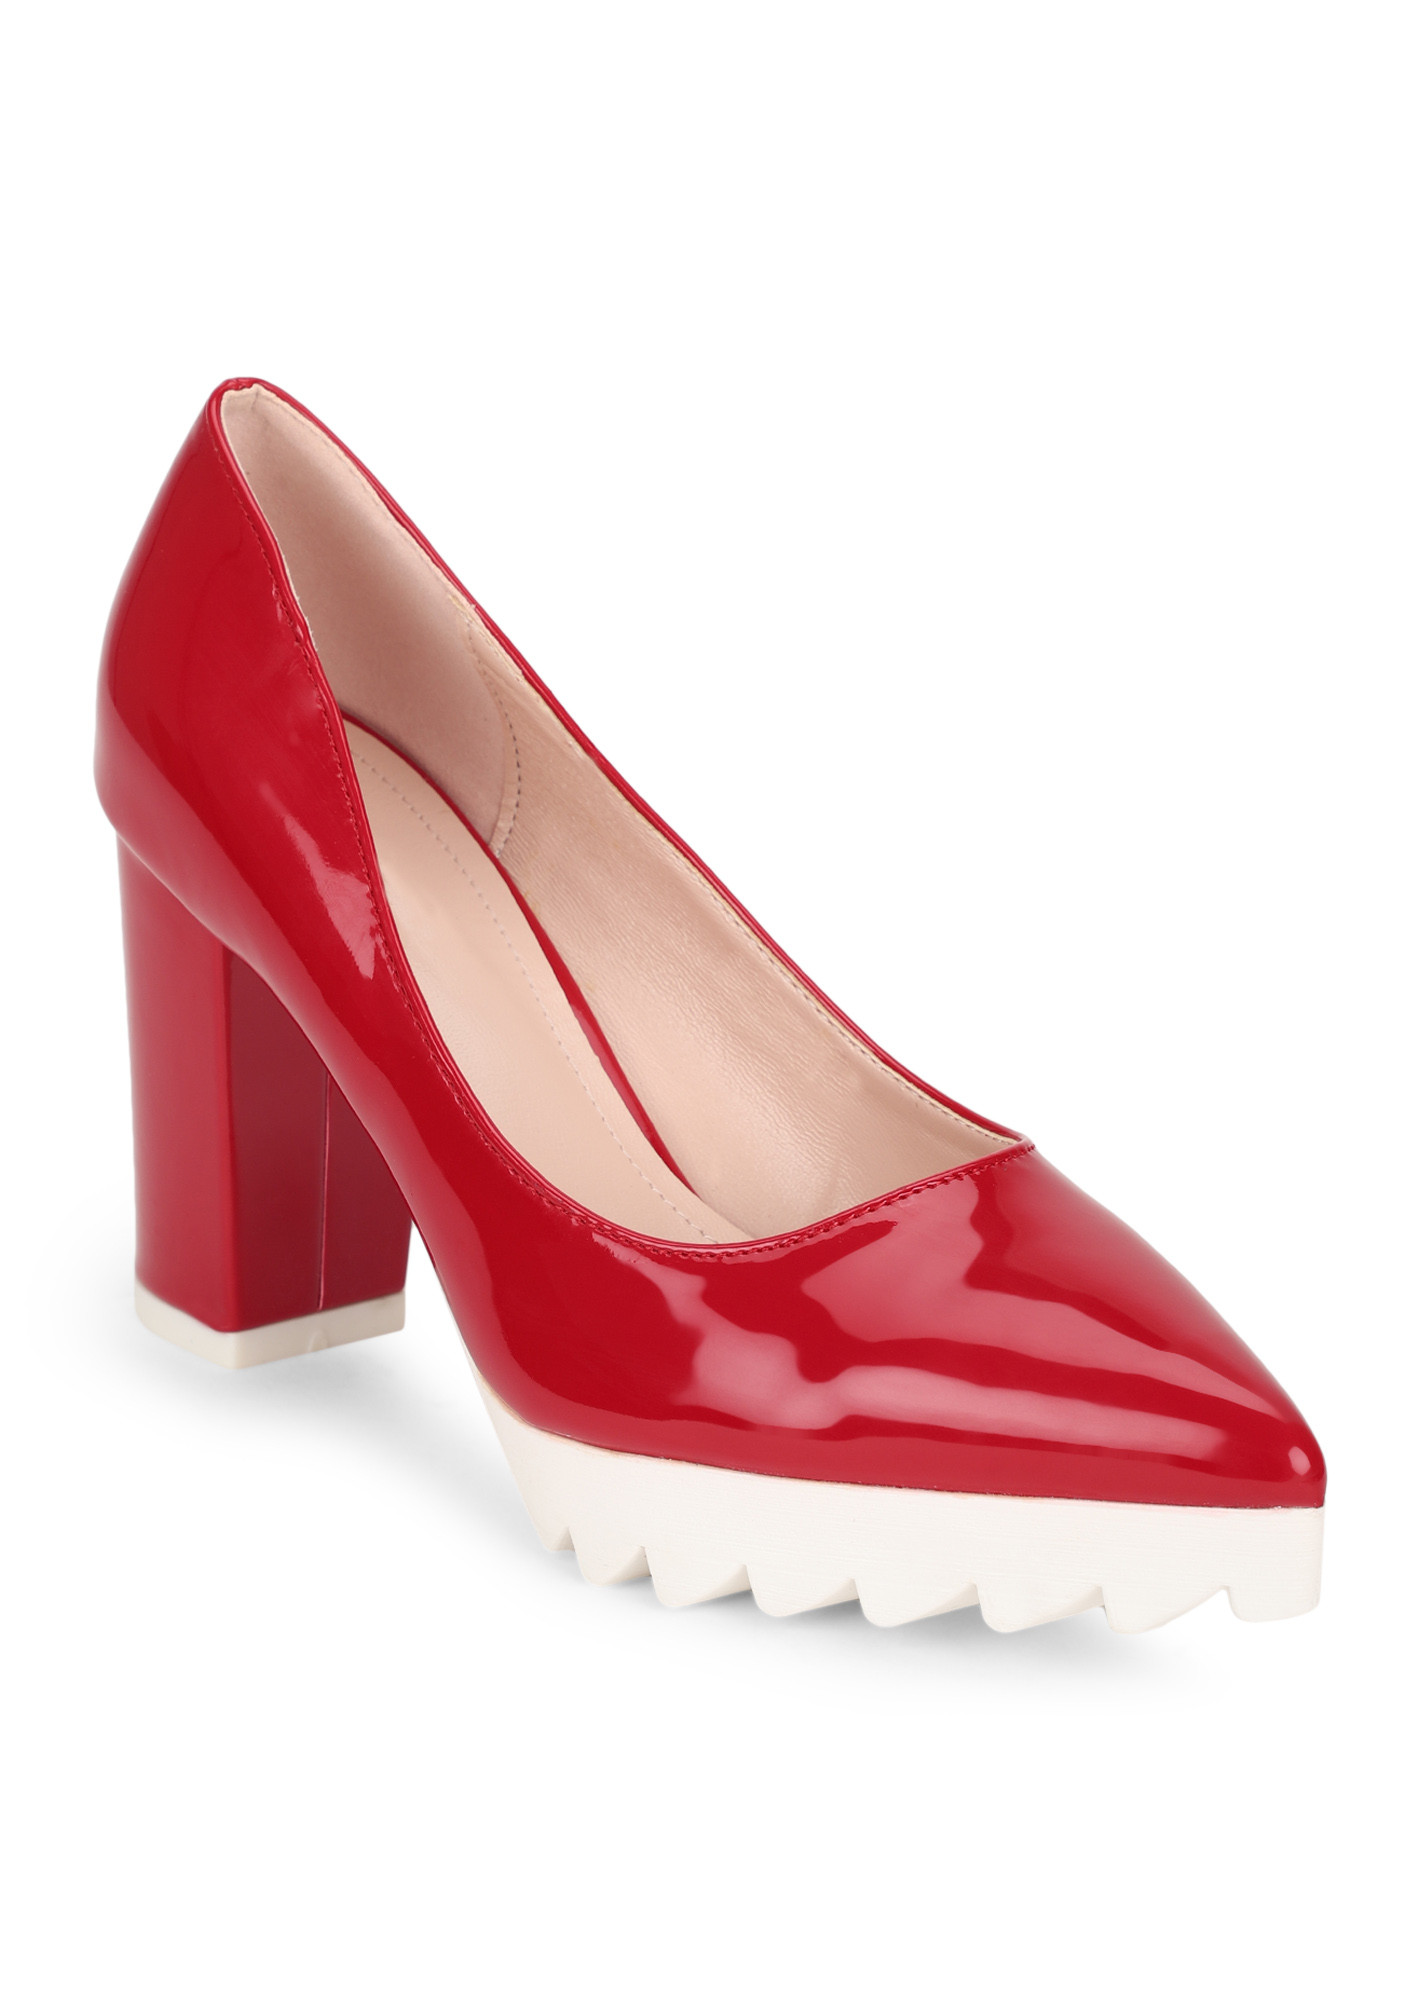 FOR MISS FANCY PANTS RED PUMPS